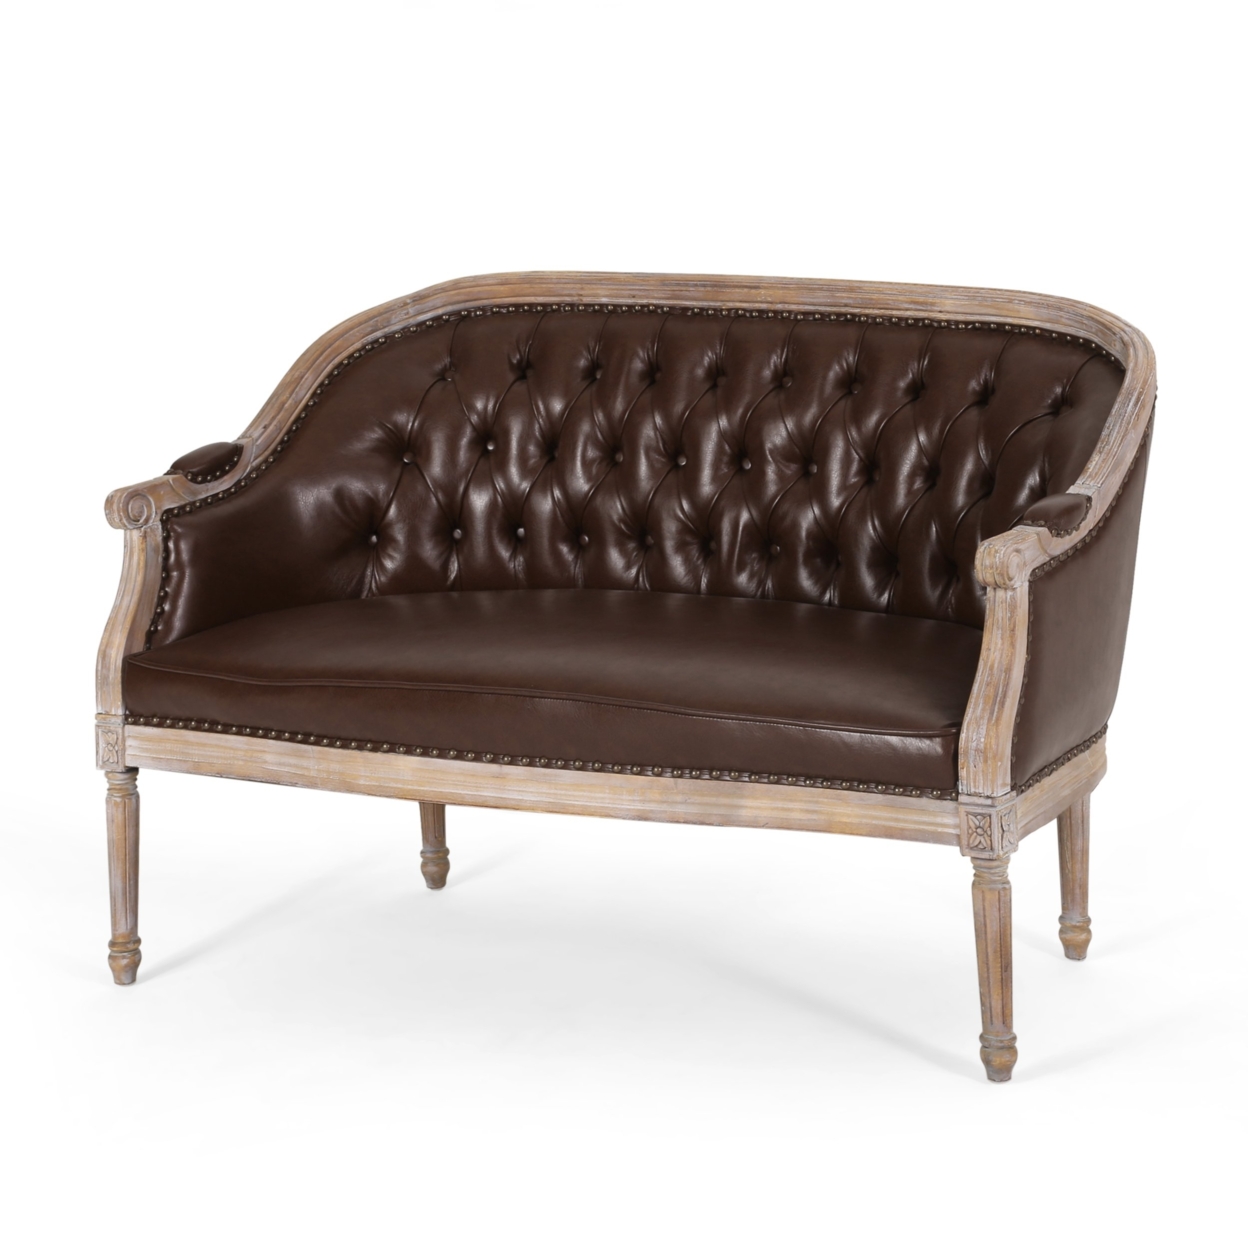 Megan Traditional Tufted Upholstered Loveseat - Antique/dark Brown, Faux Leather